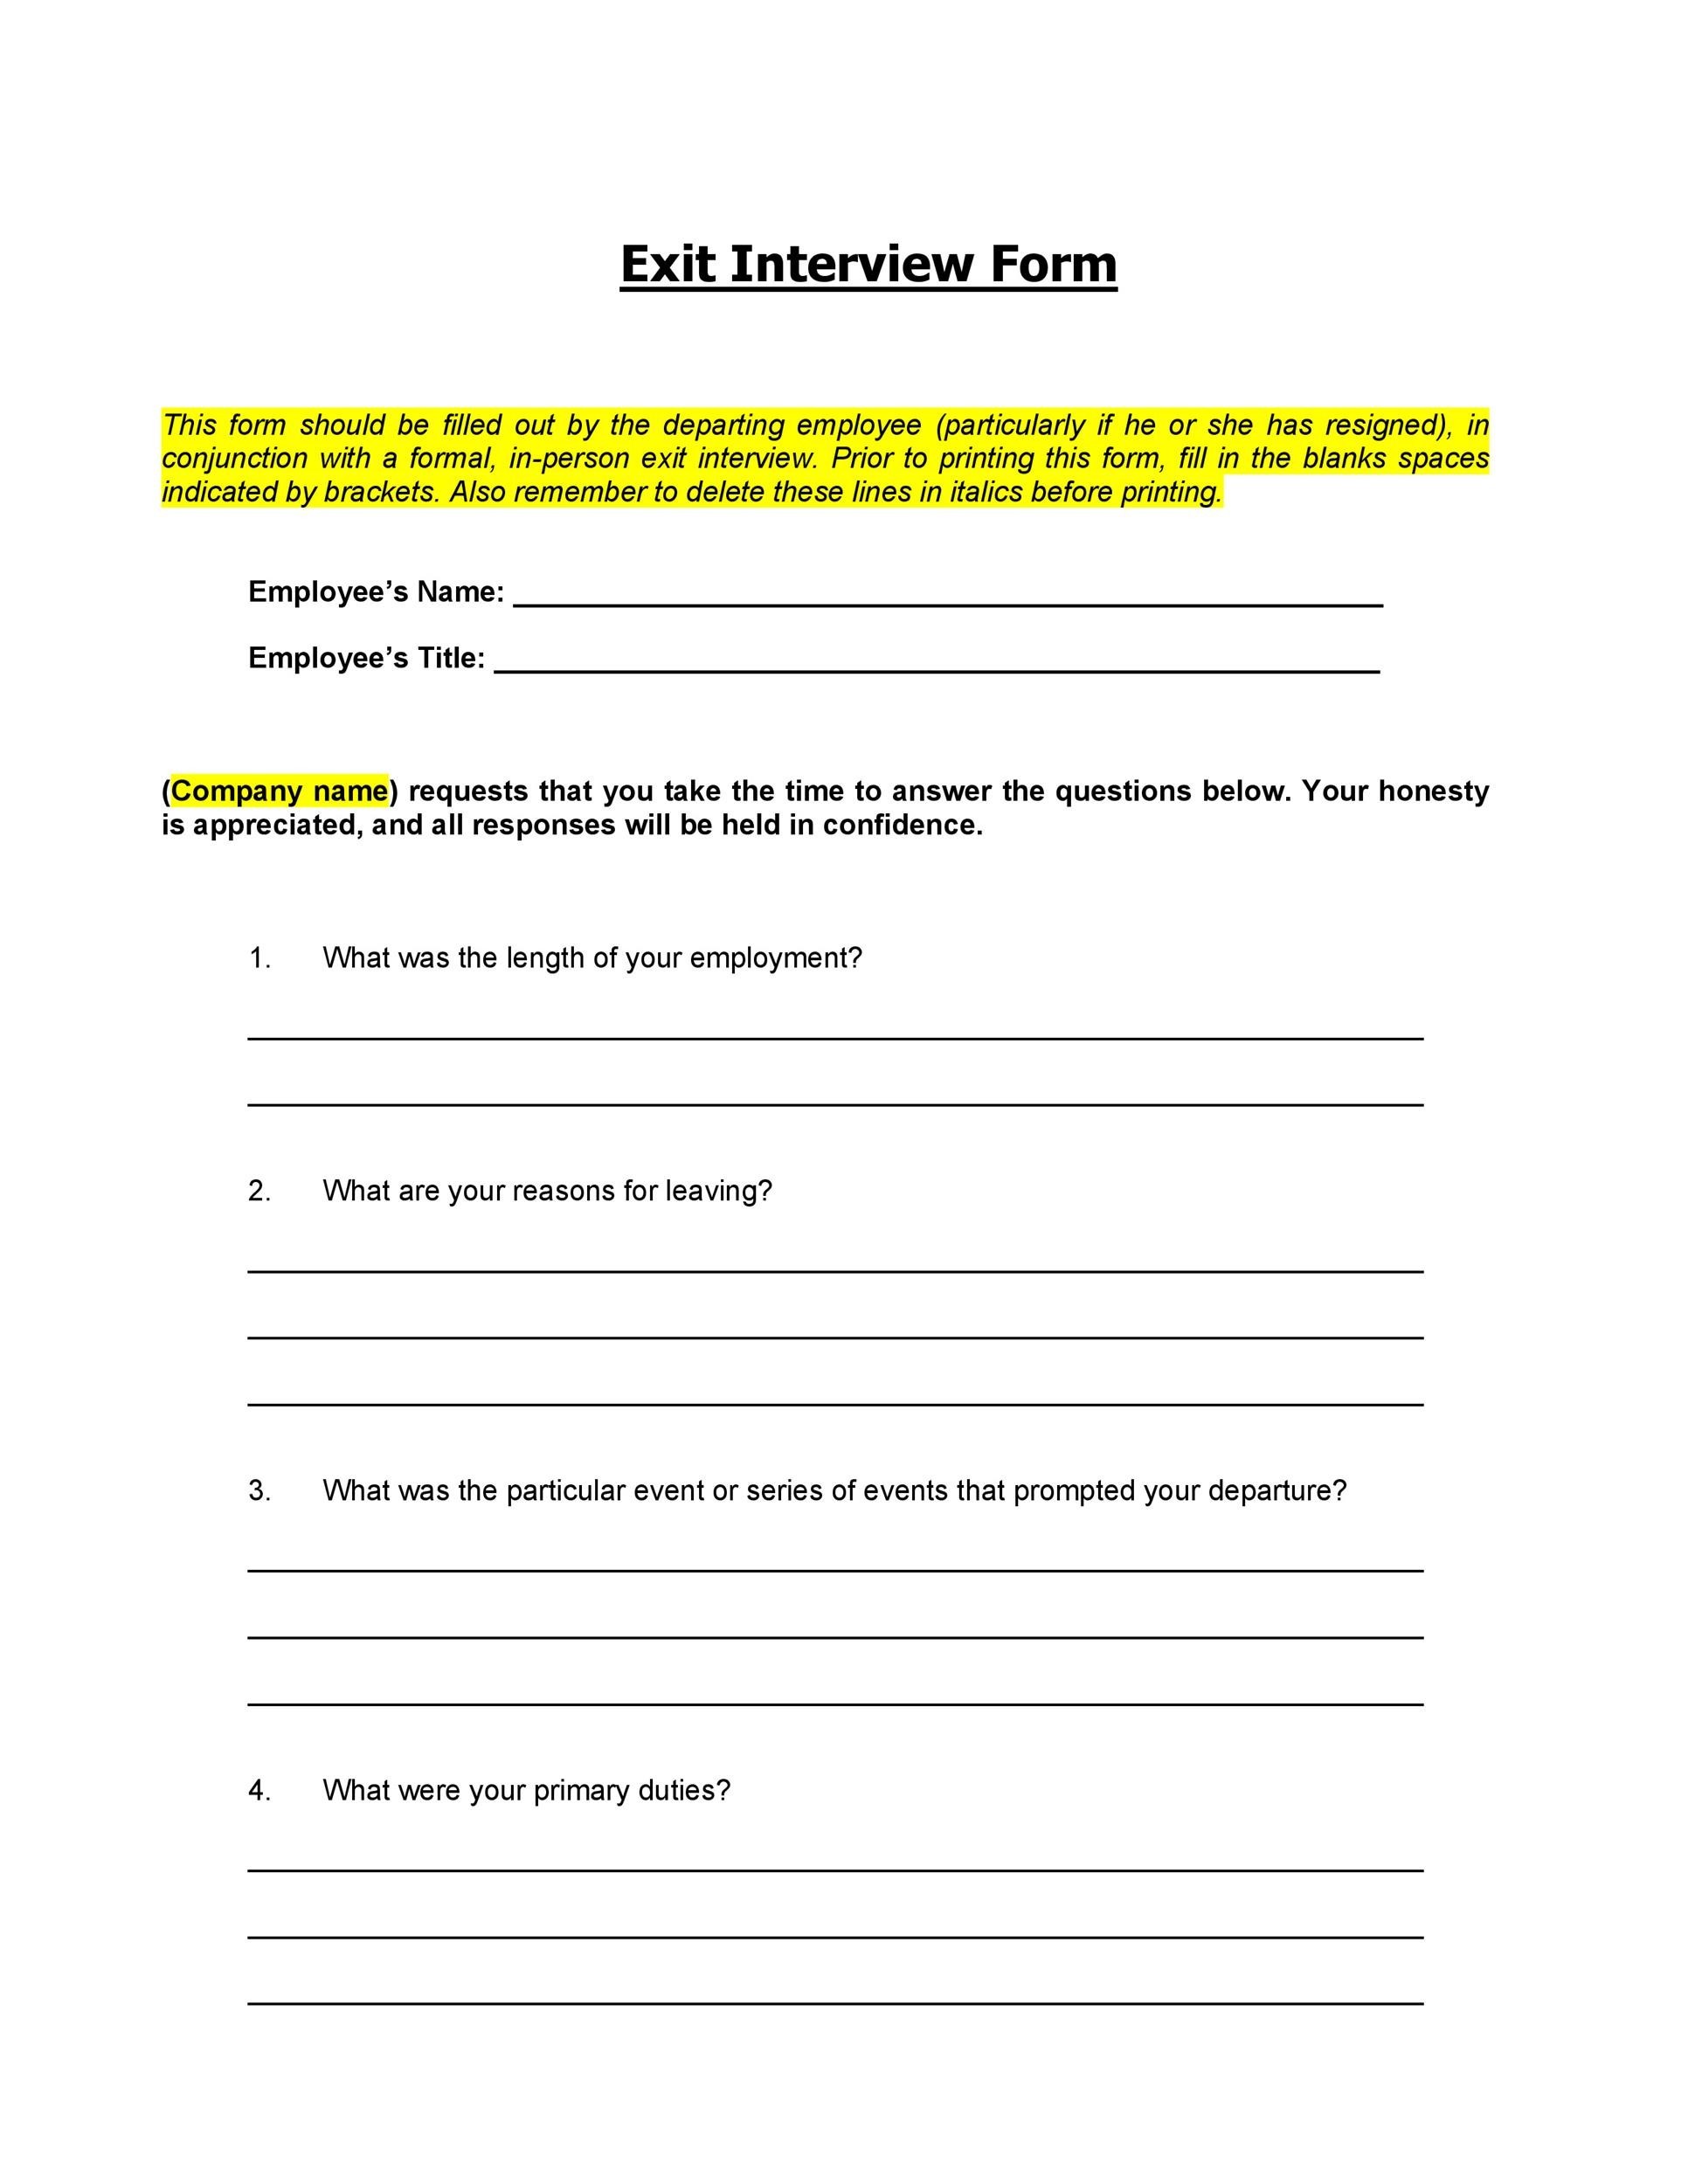 Free exit interview template 20